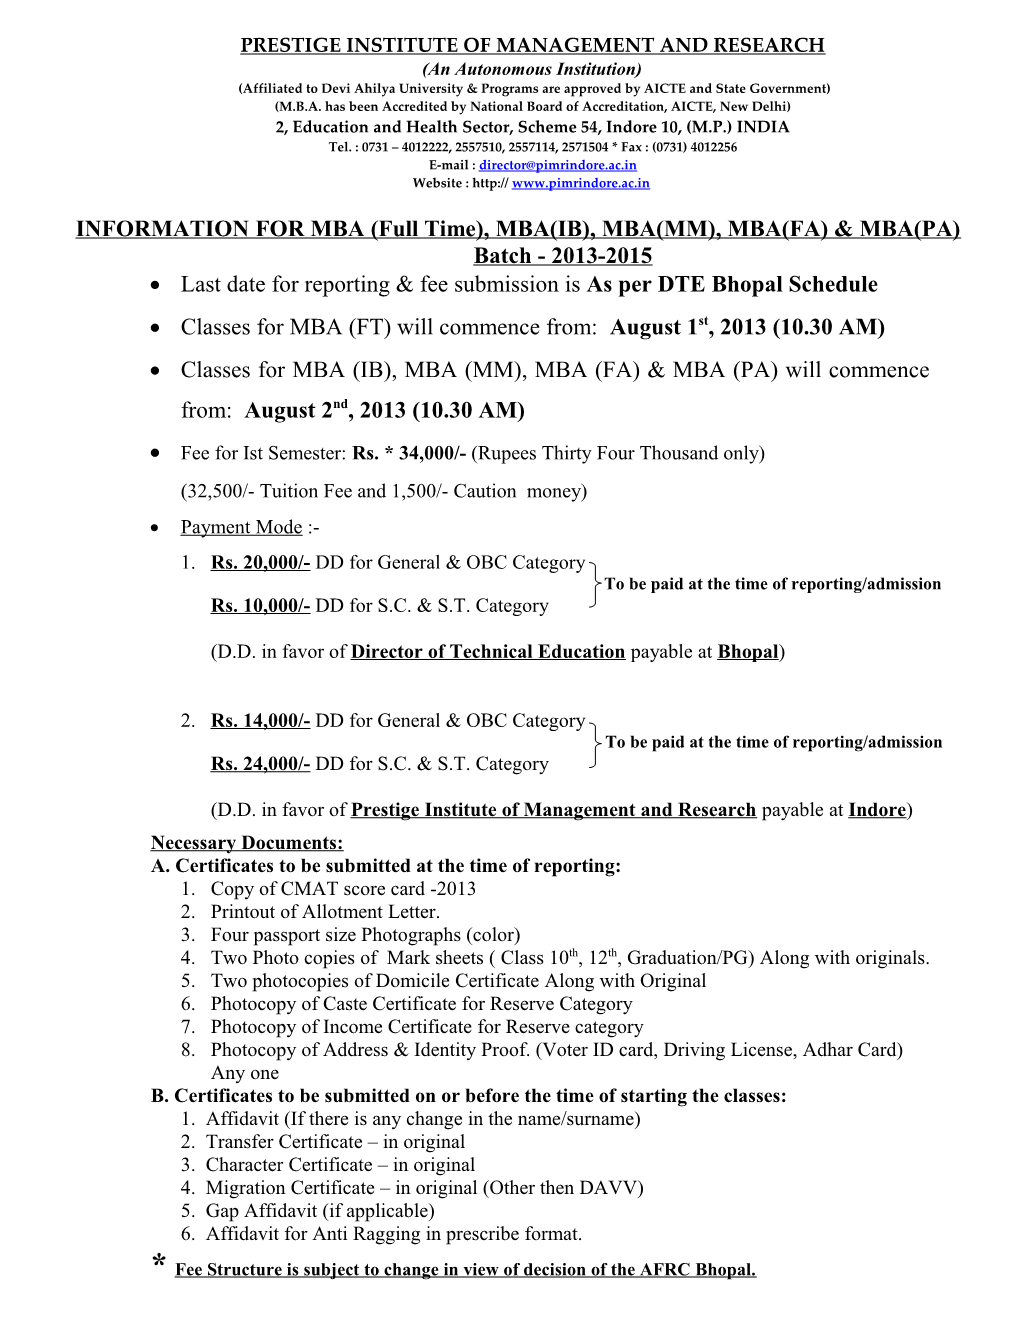 INFORMATION for MBA (Part Time) 2009-2012 Batch